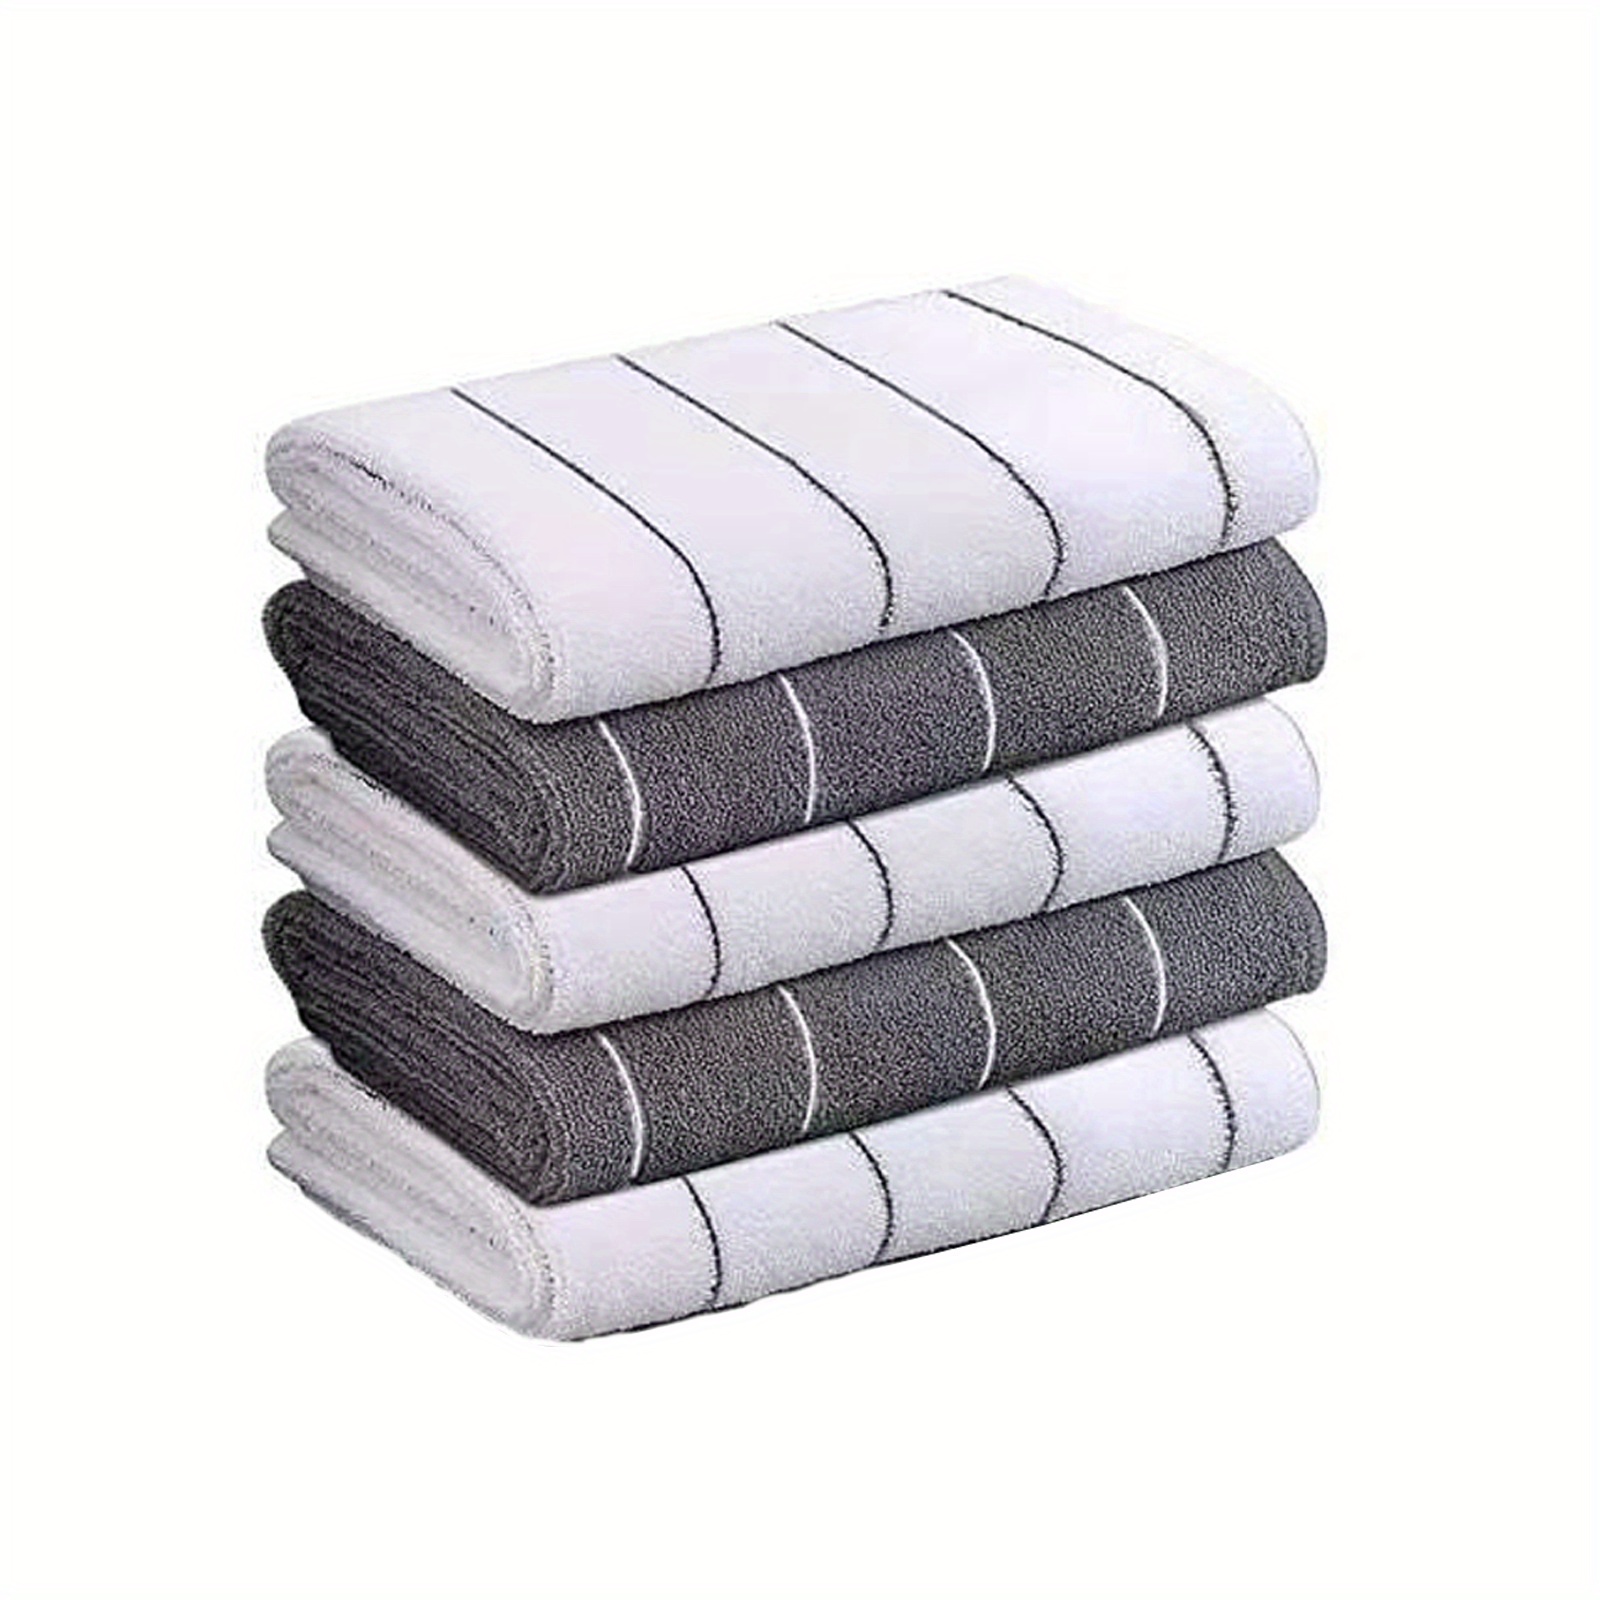 Farmhouse Stripes Black And White Kitchen Towel Microfiber Dish Towel Tea  Towel Soft Household Super Absorbent Cleaning Cloth - Towel/towel Set -  AliExpress